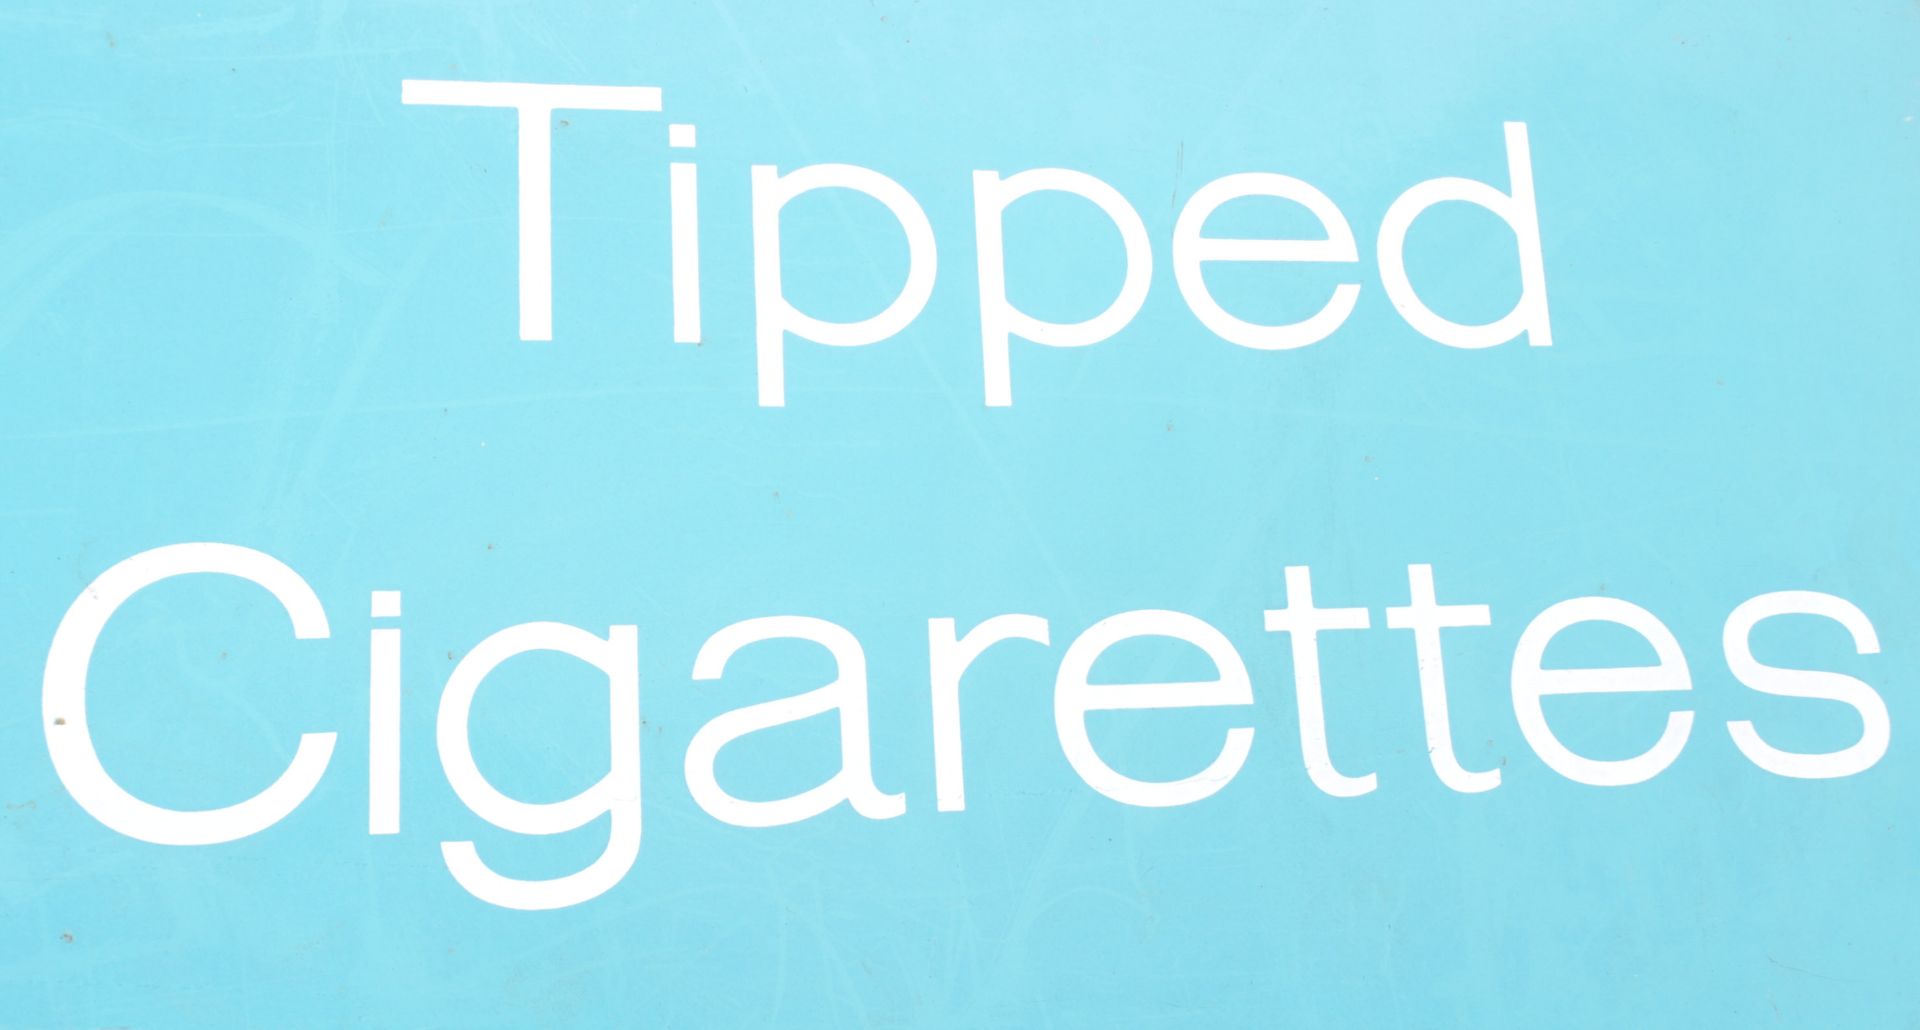 BRISTOL TIPPED CIGARETTES - MID CENTURY ENAMEL SIGN - Image 2 of 4